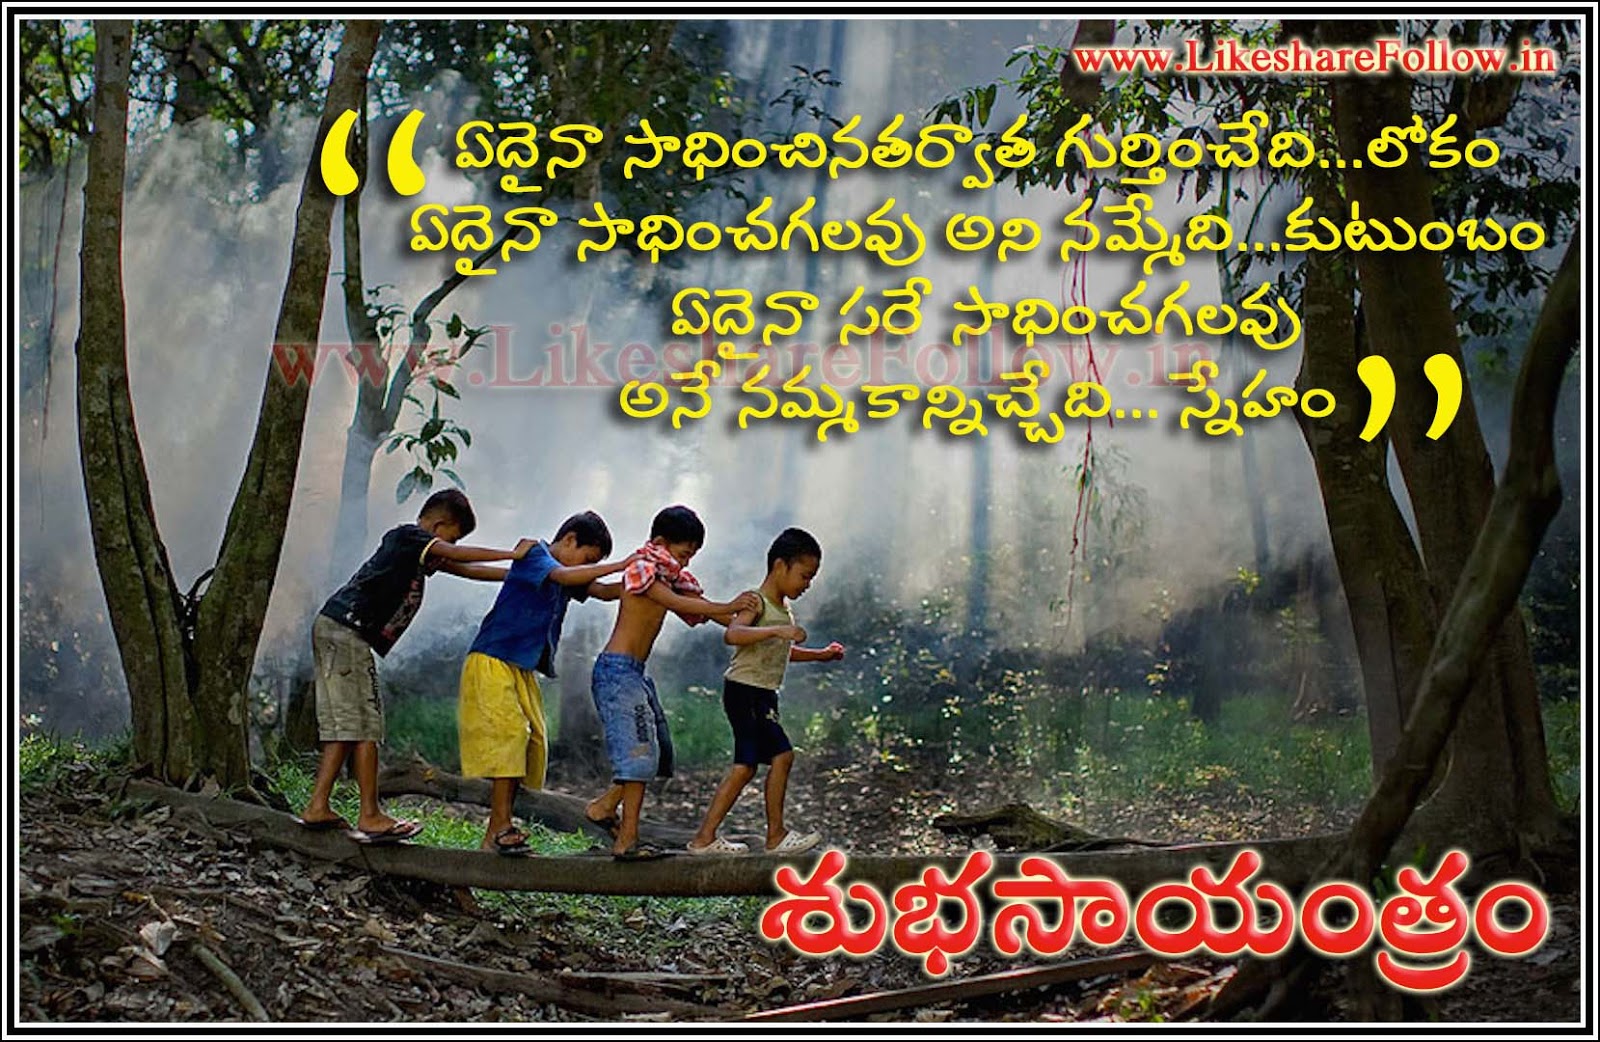 Best Friendship Quotes sms messages in telugu | Like Share Follow